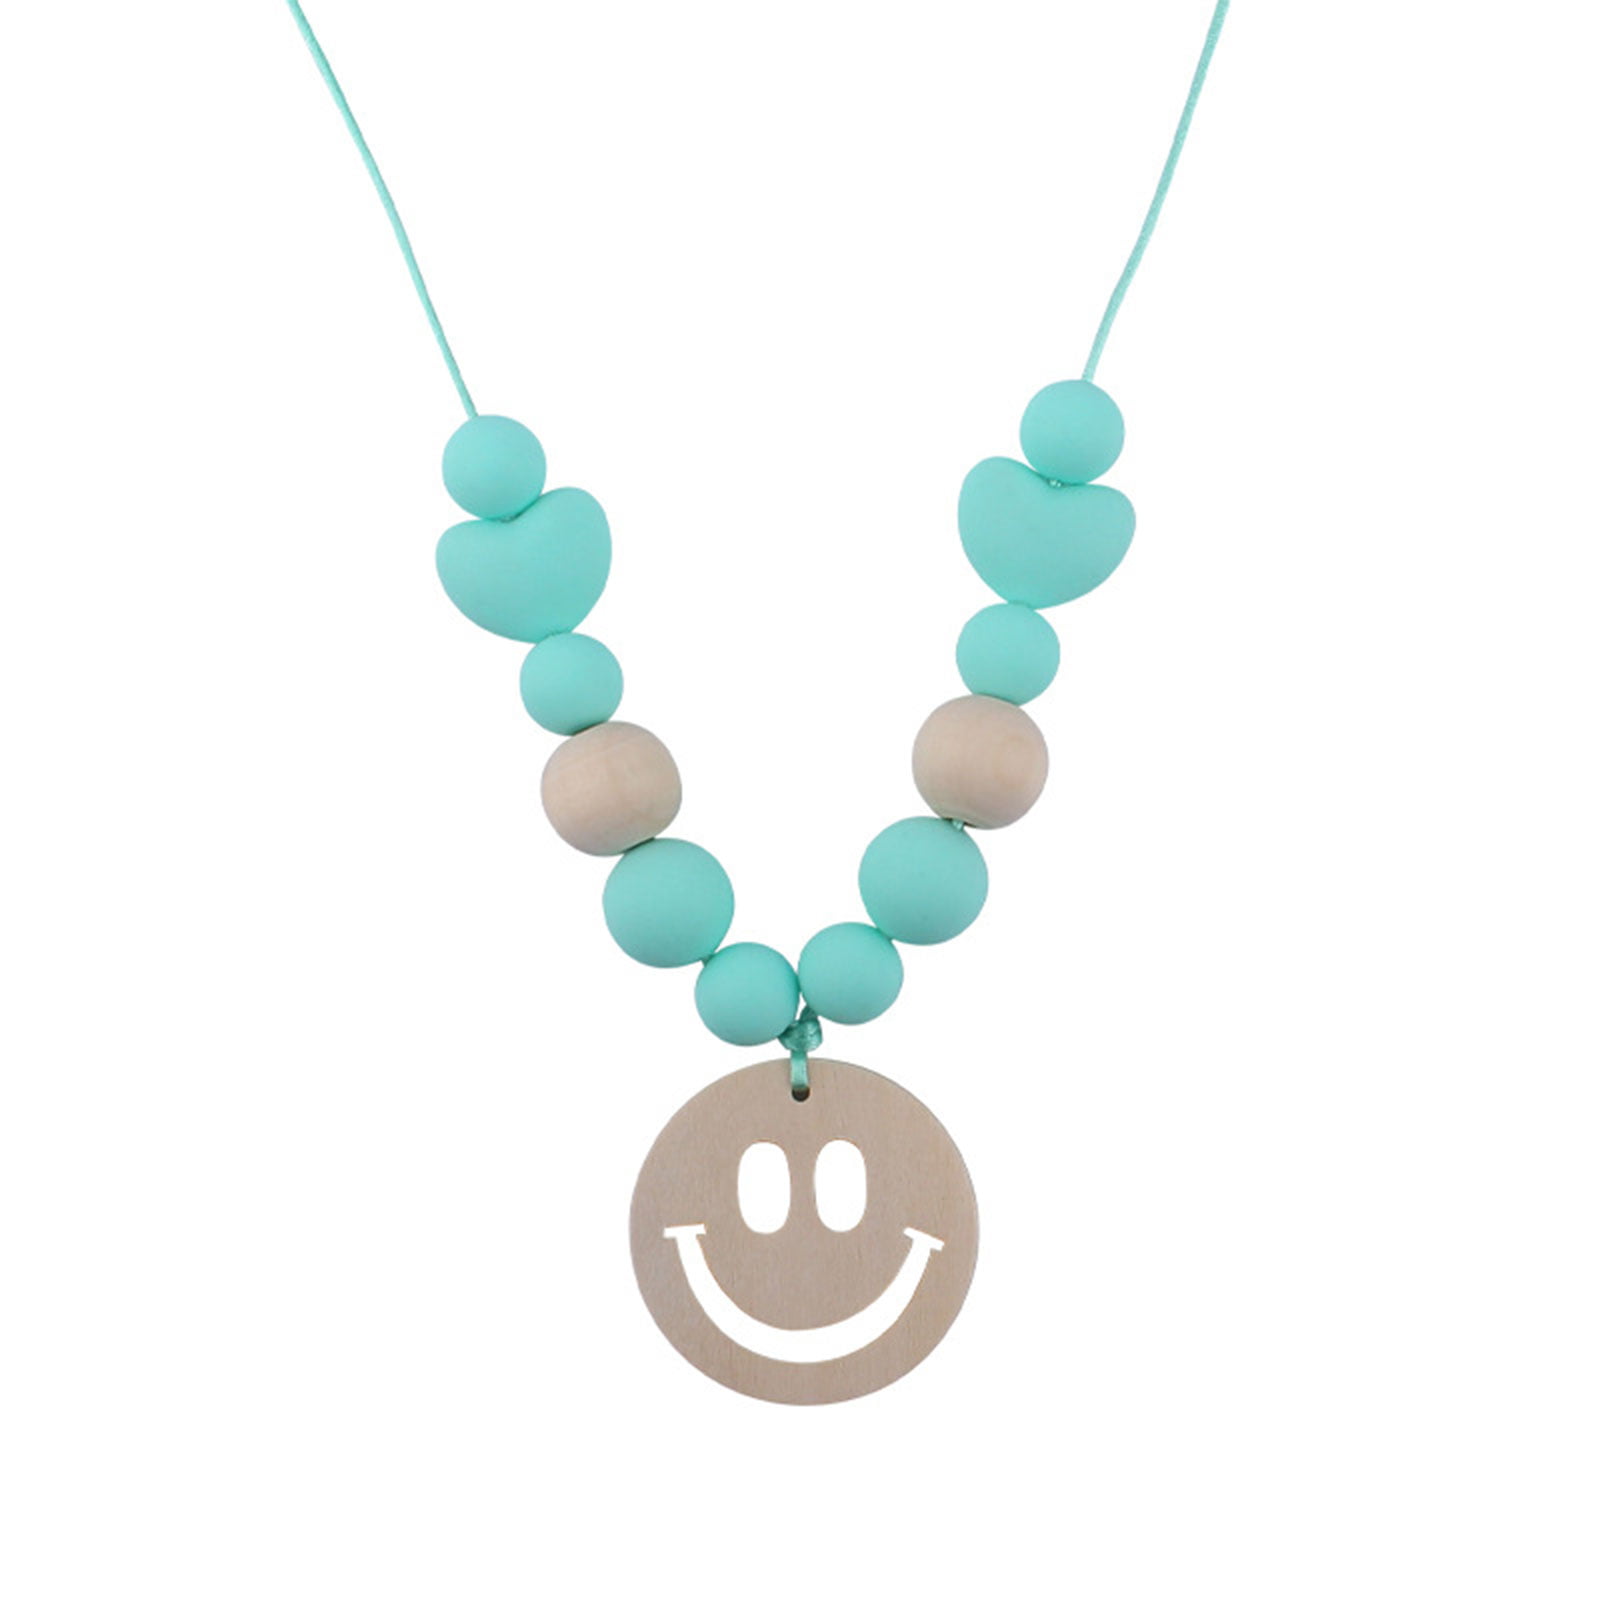 Silicone Necklace Teether Teething Nursing Mint Gray Beige Baby Shower Gift 